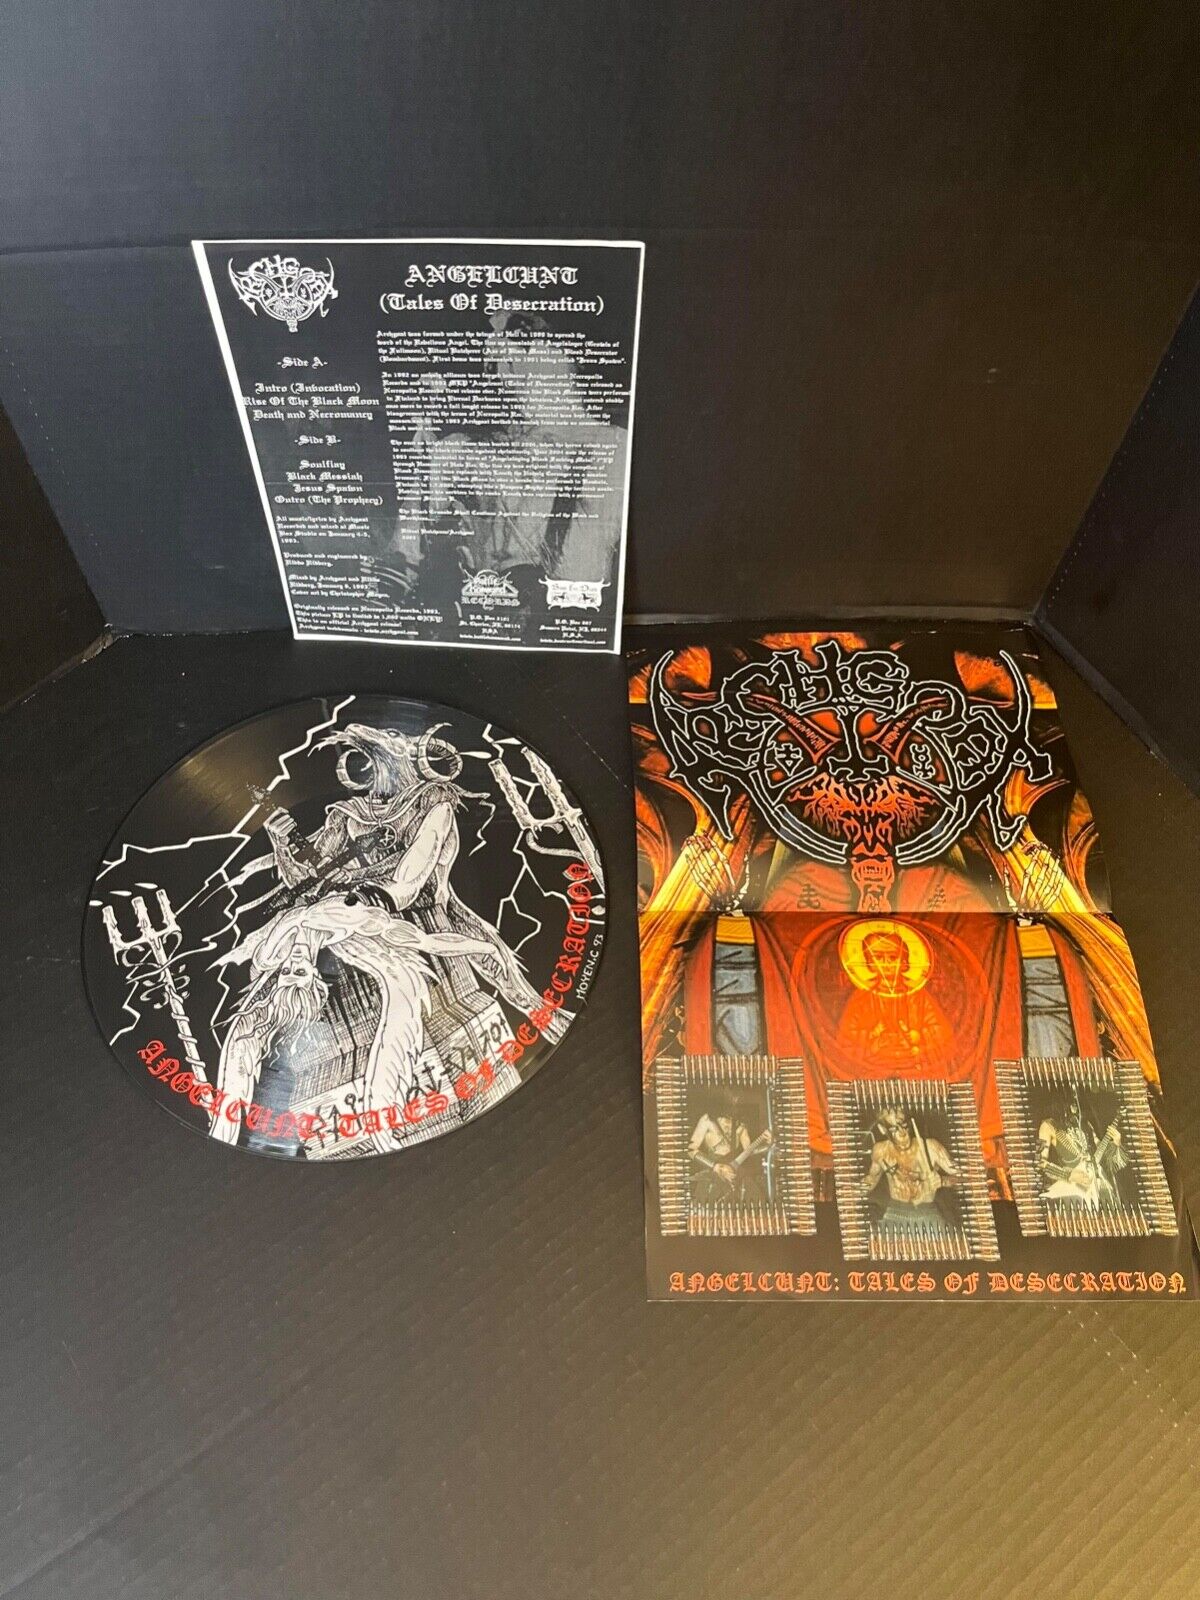 ARCHGOAT : ANGEL CUNT TALES OF DESECRATION PICTURE DISC VINYL WITH POSTER 